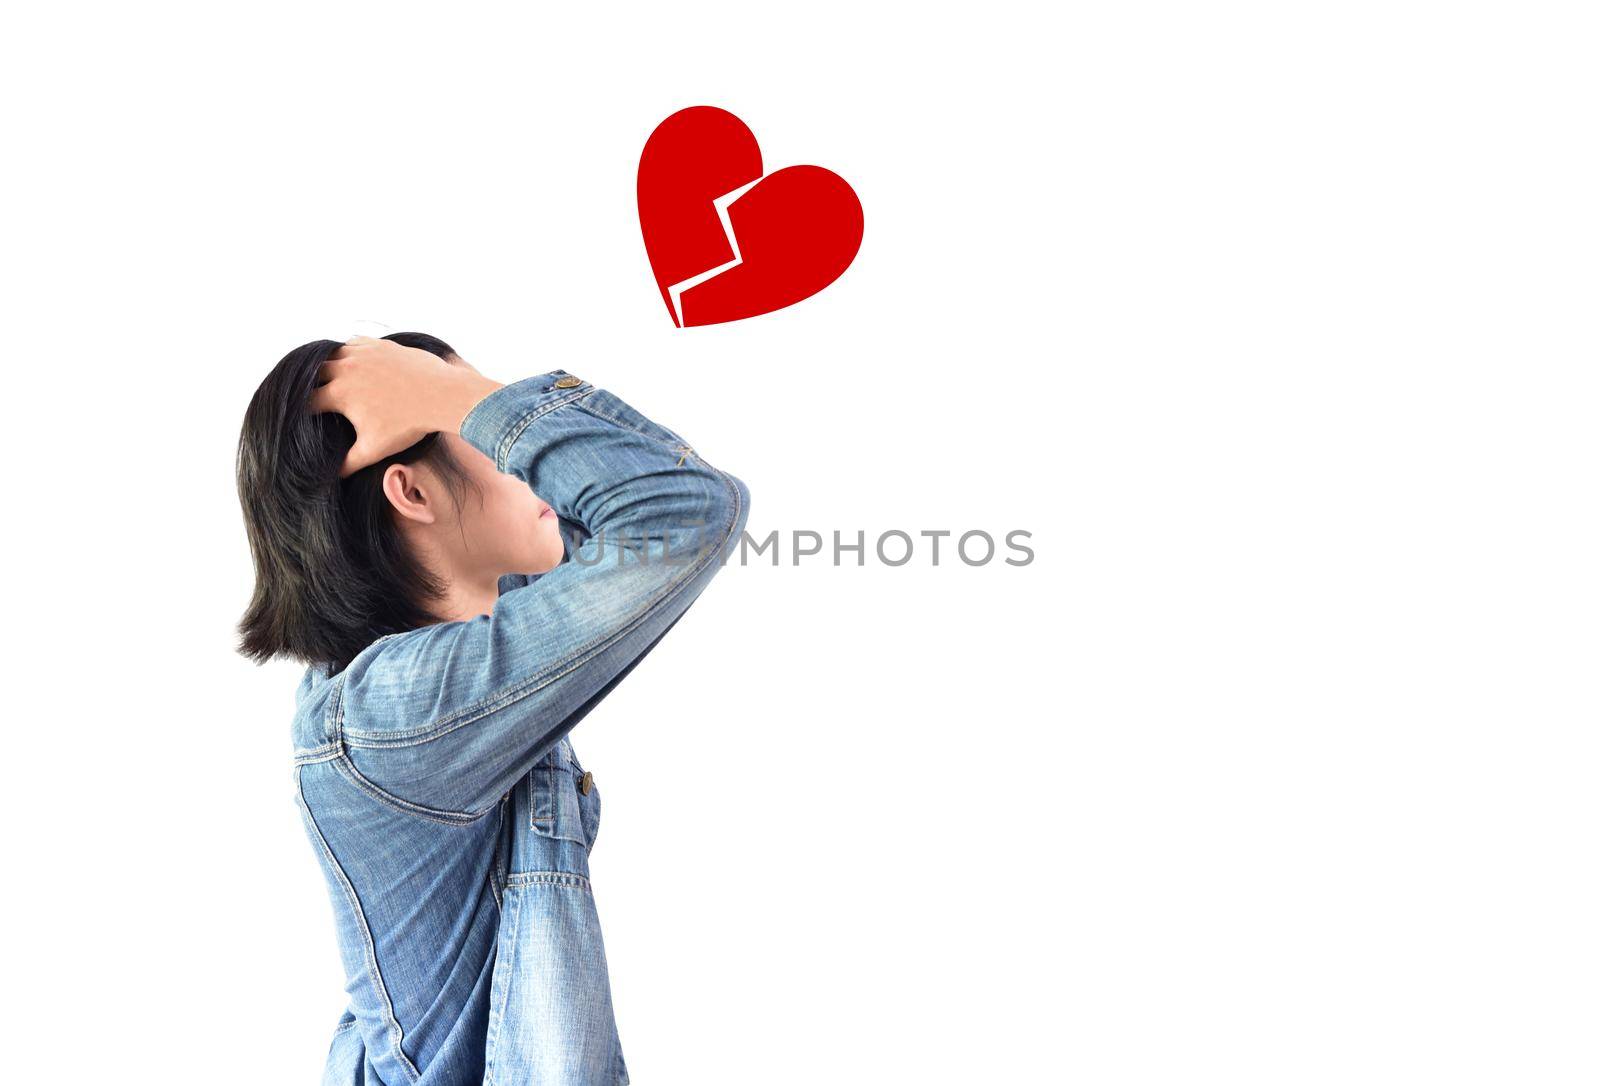 The person who loses the heart, holds the head with both hands and worry to love or not love, isolated white background, Heart broken concept, indeterminable